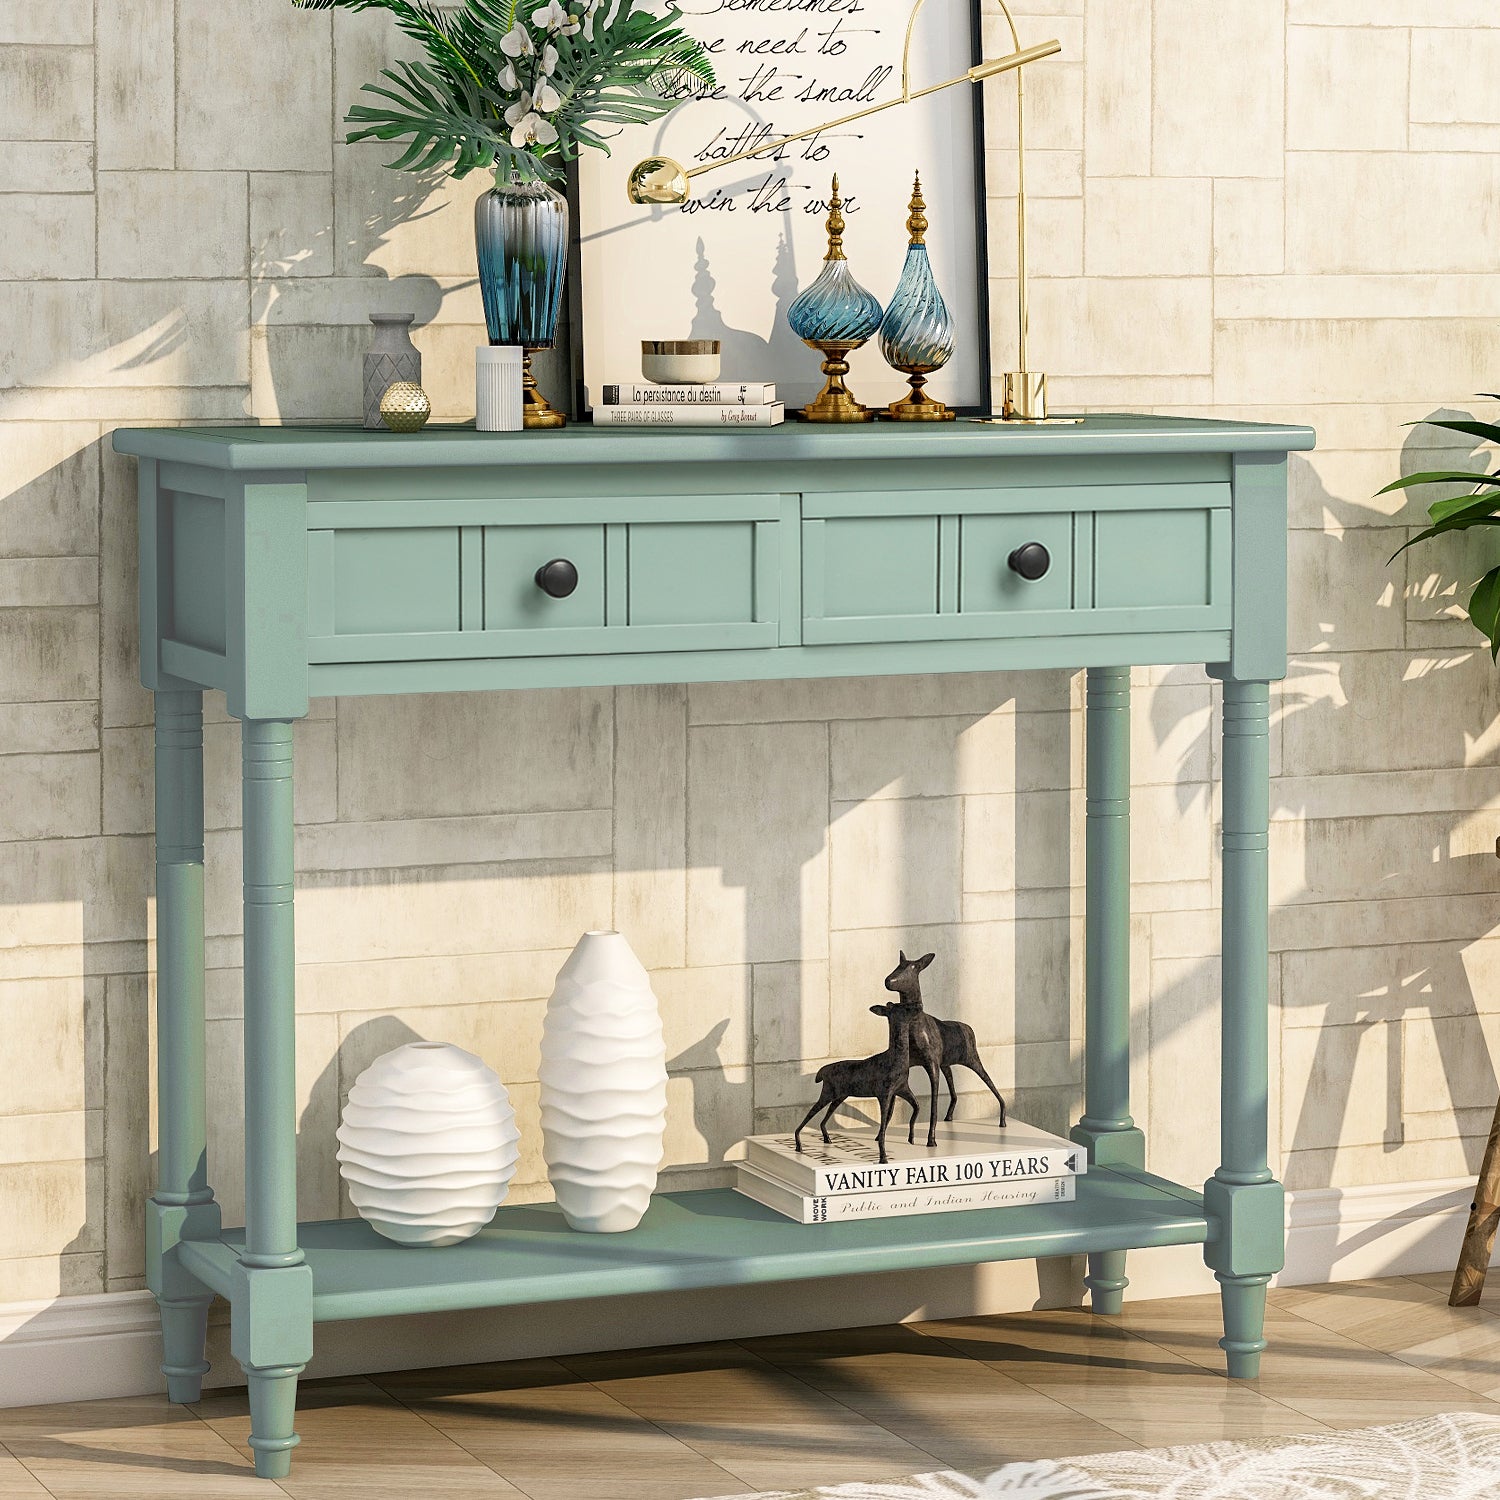 TREXM Daisy Series Console Table Traditional Design with Two Drawers and Bottom Shelf Acacia Mangium (Retro blue)